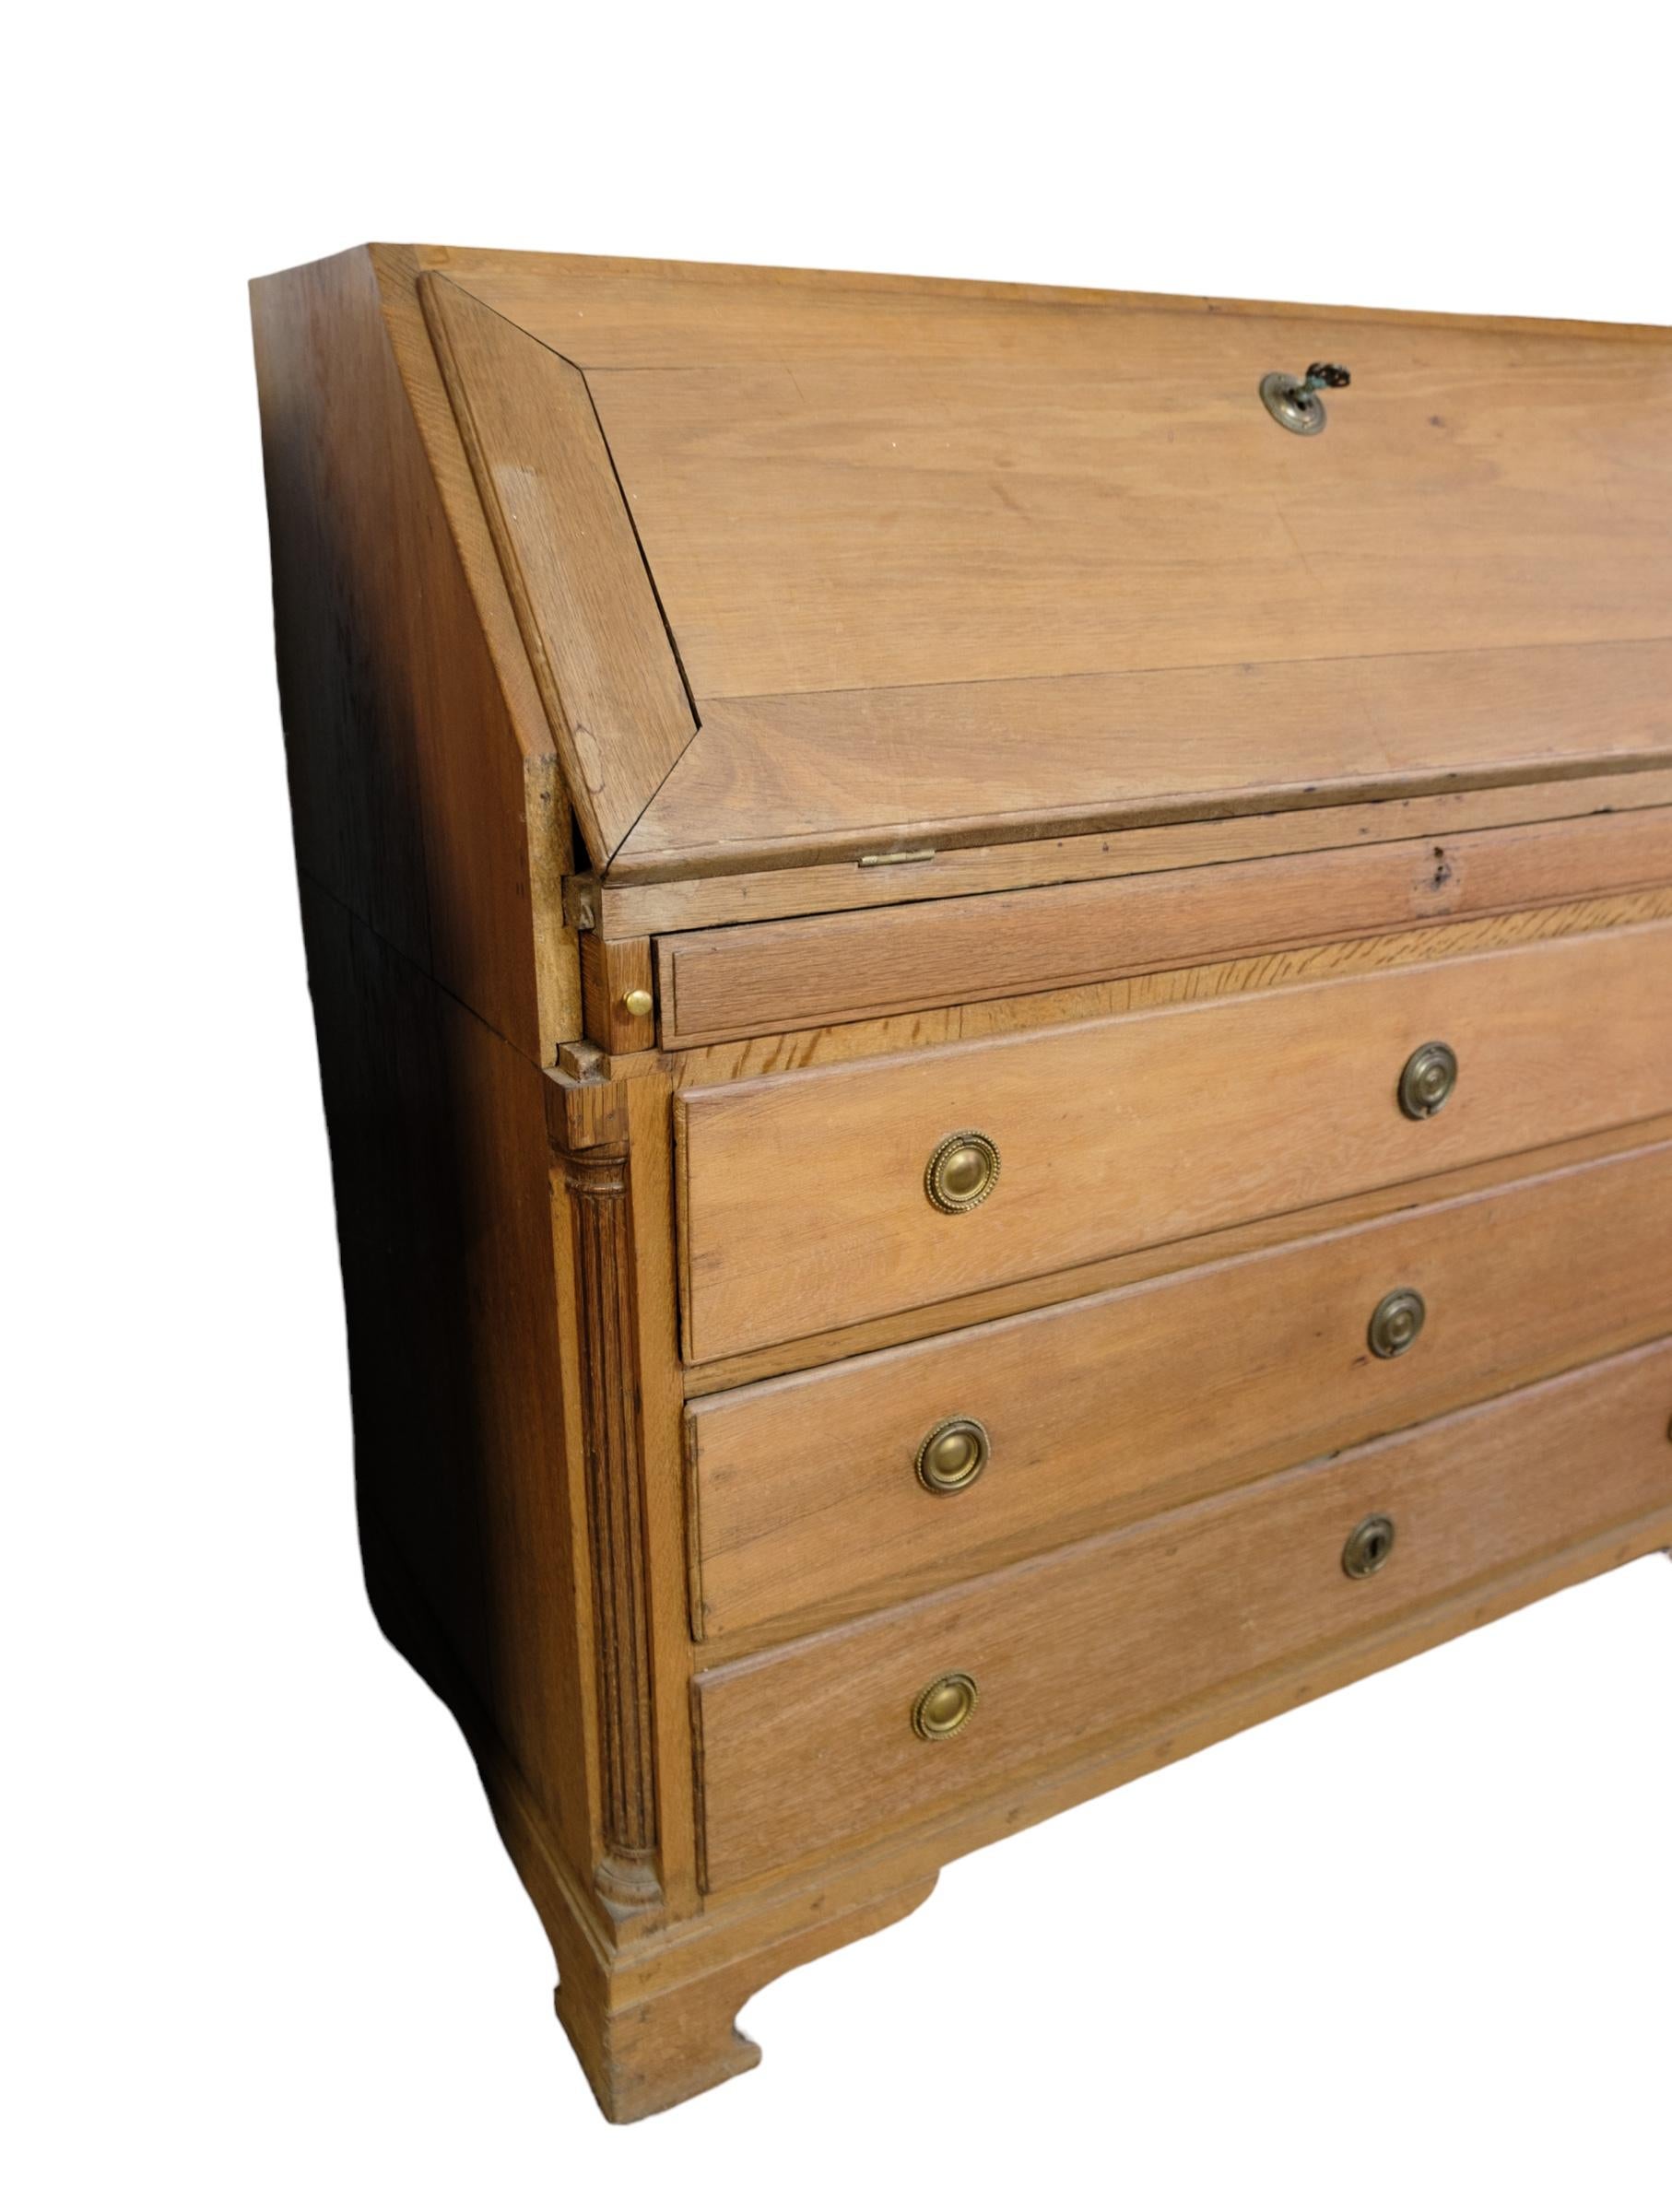 Late 18th Century Louis Seize style chatol made in oak from around 1780s For Sale